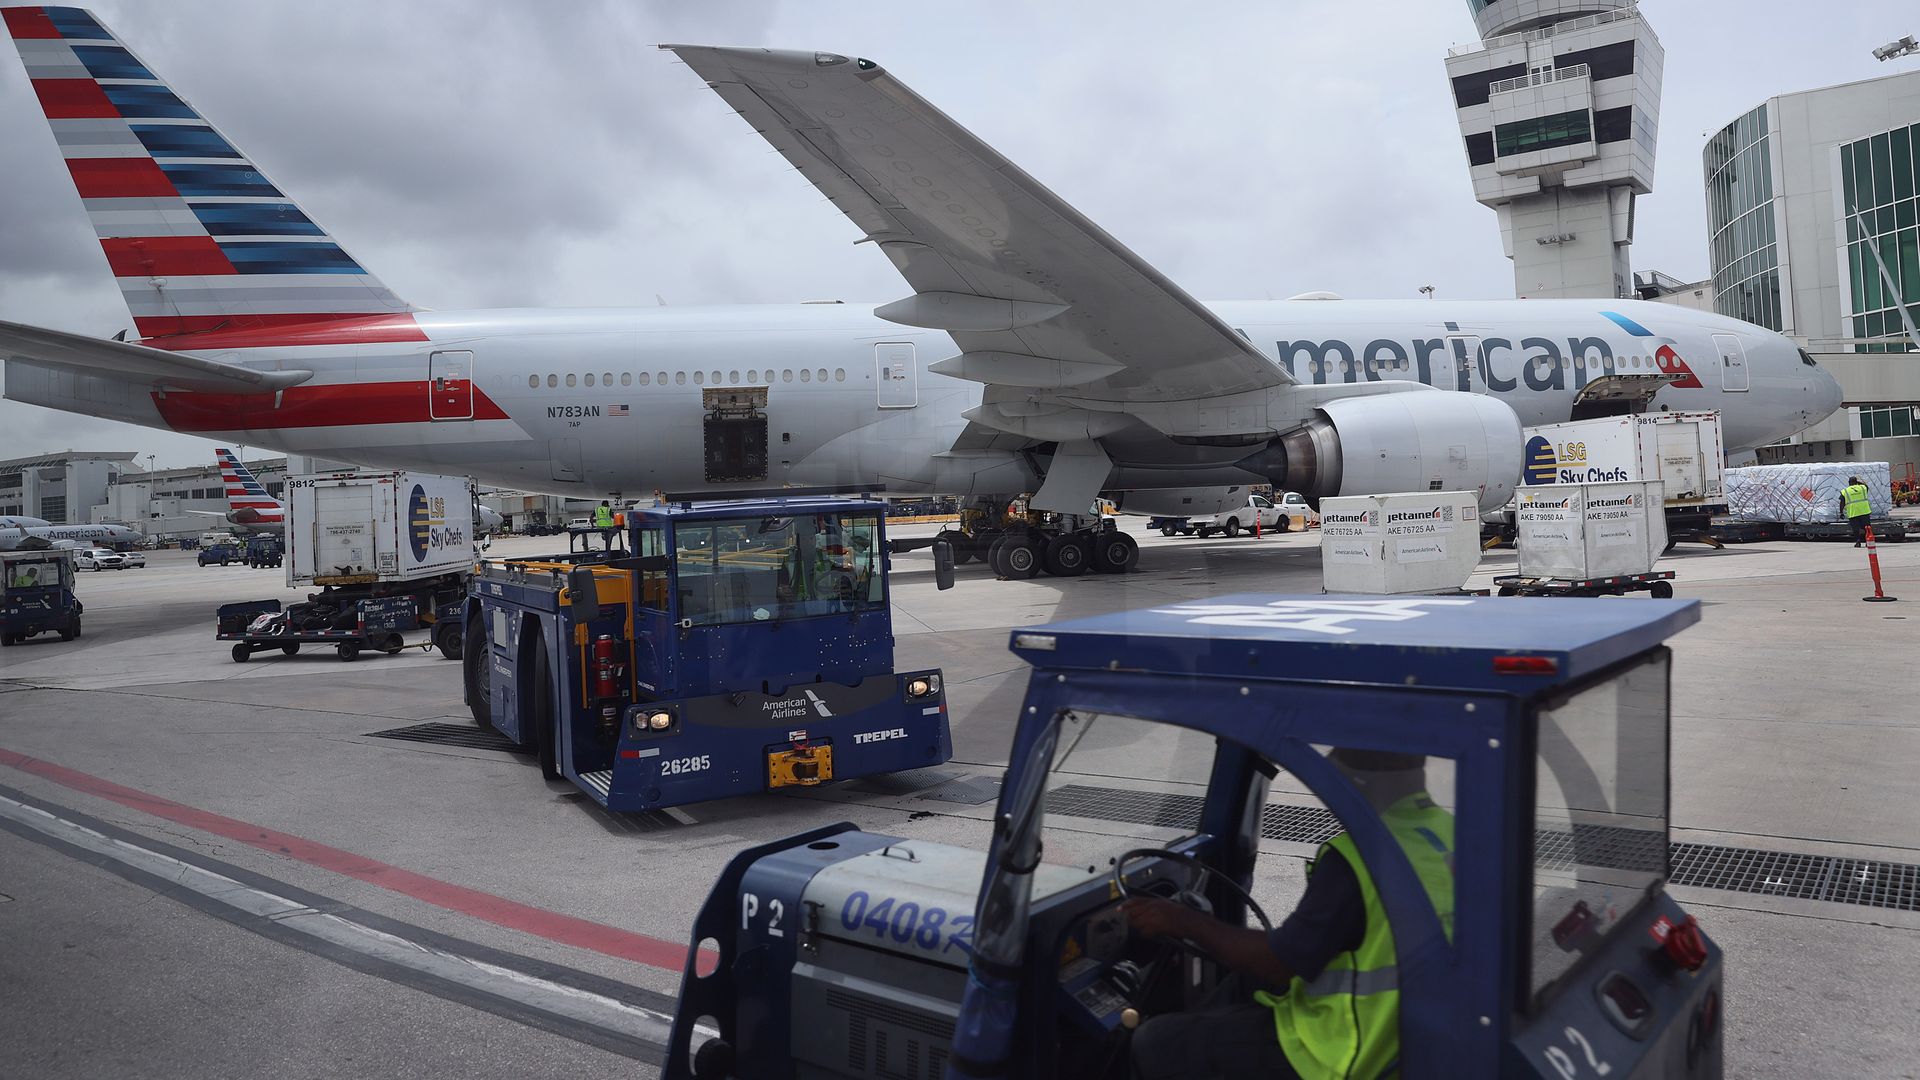  Workers prepare an American Airlines plane at a gate before its flight from the Miami International Airport on June 16, 2021 in Miami, Florida. 